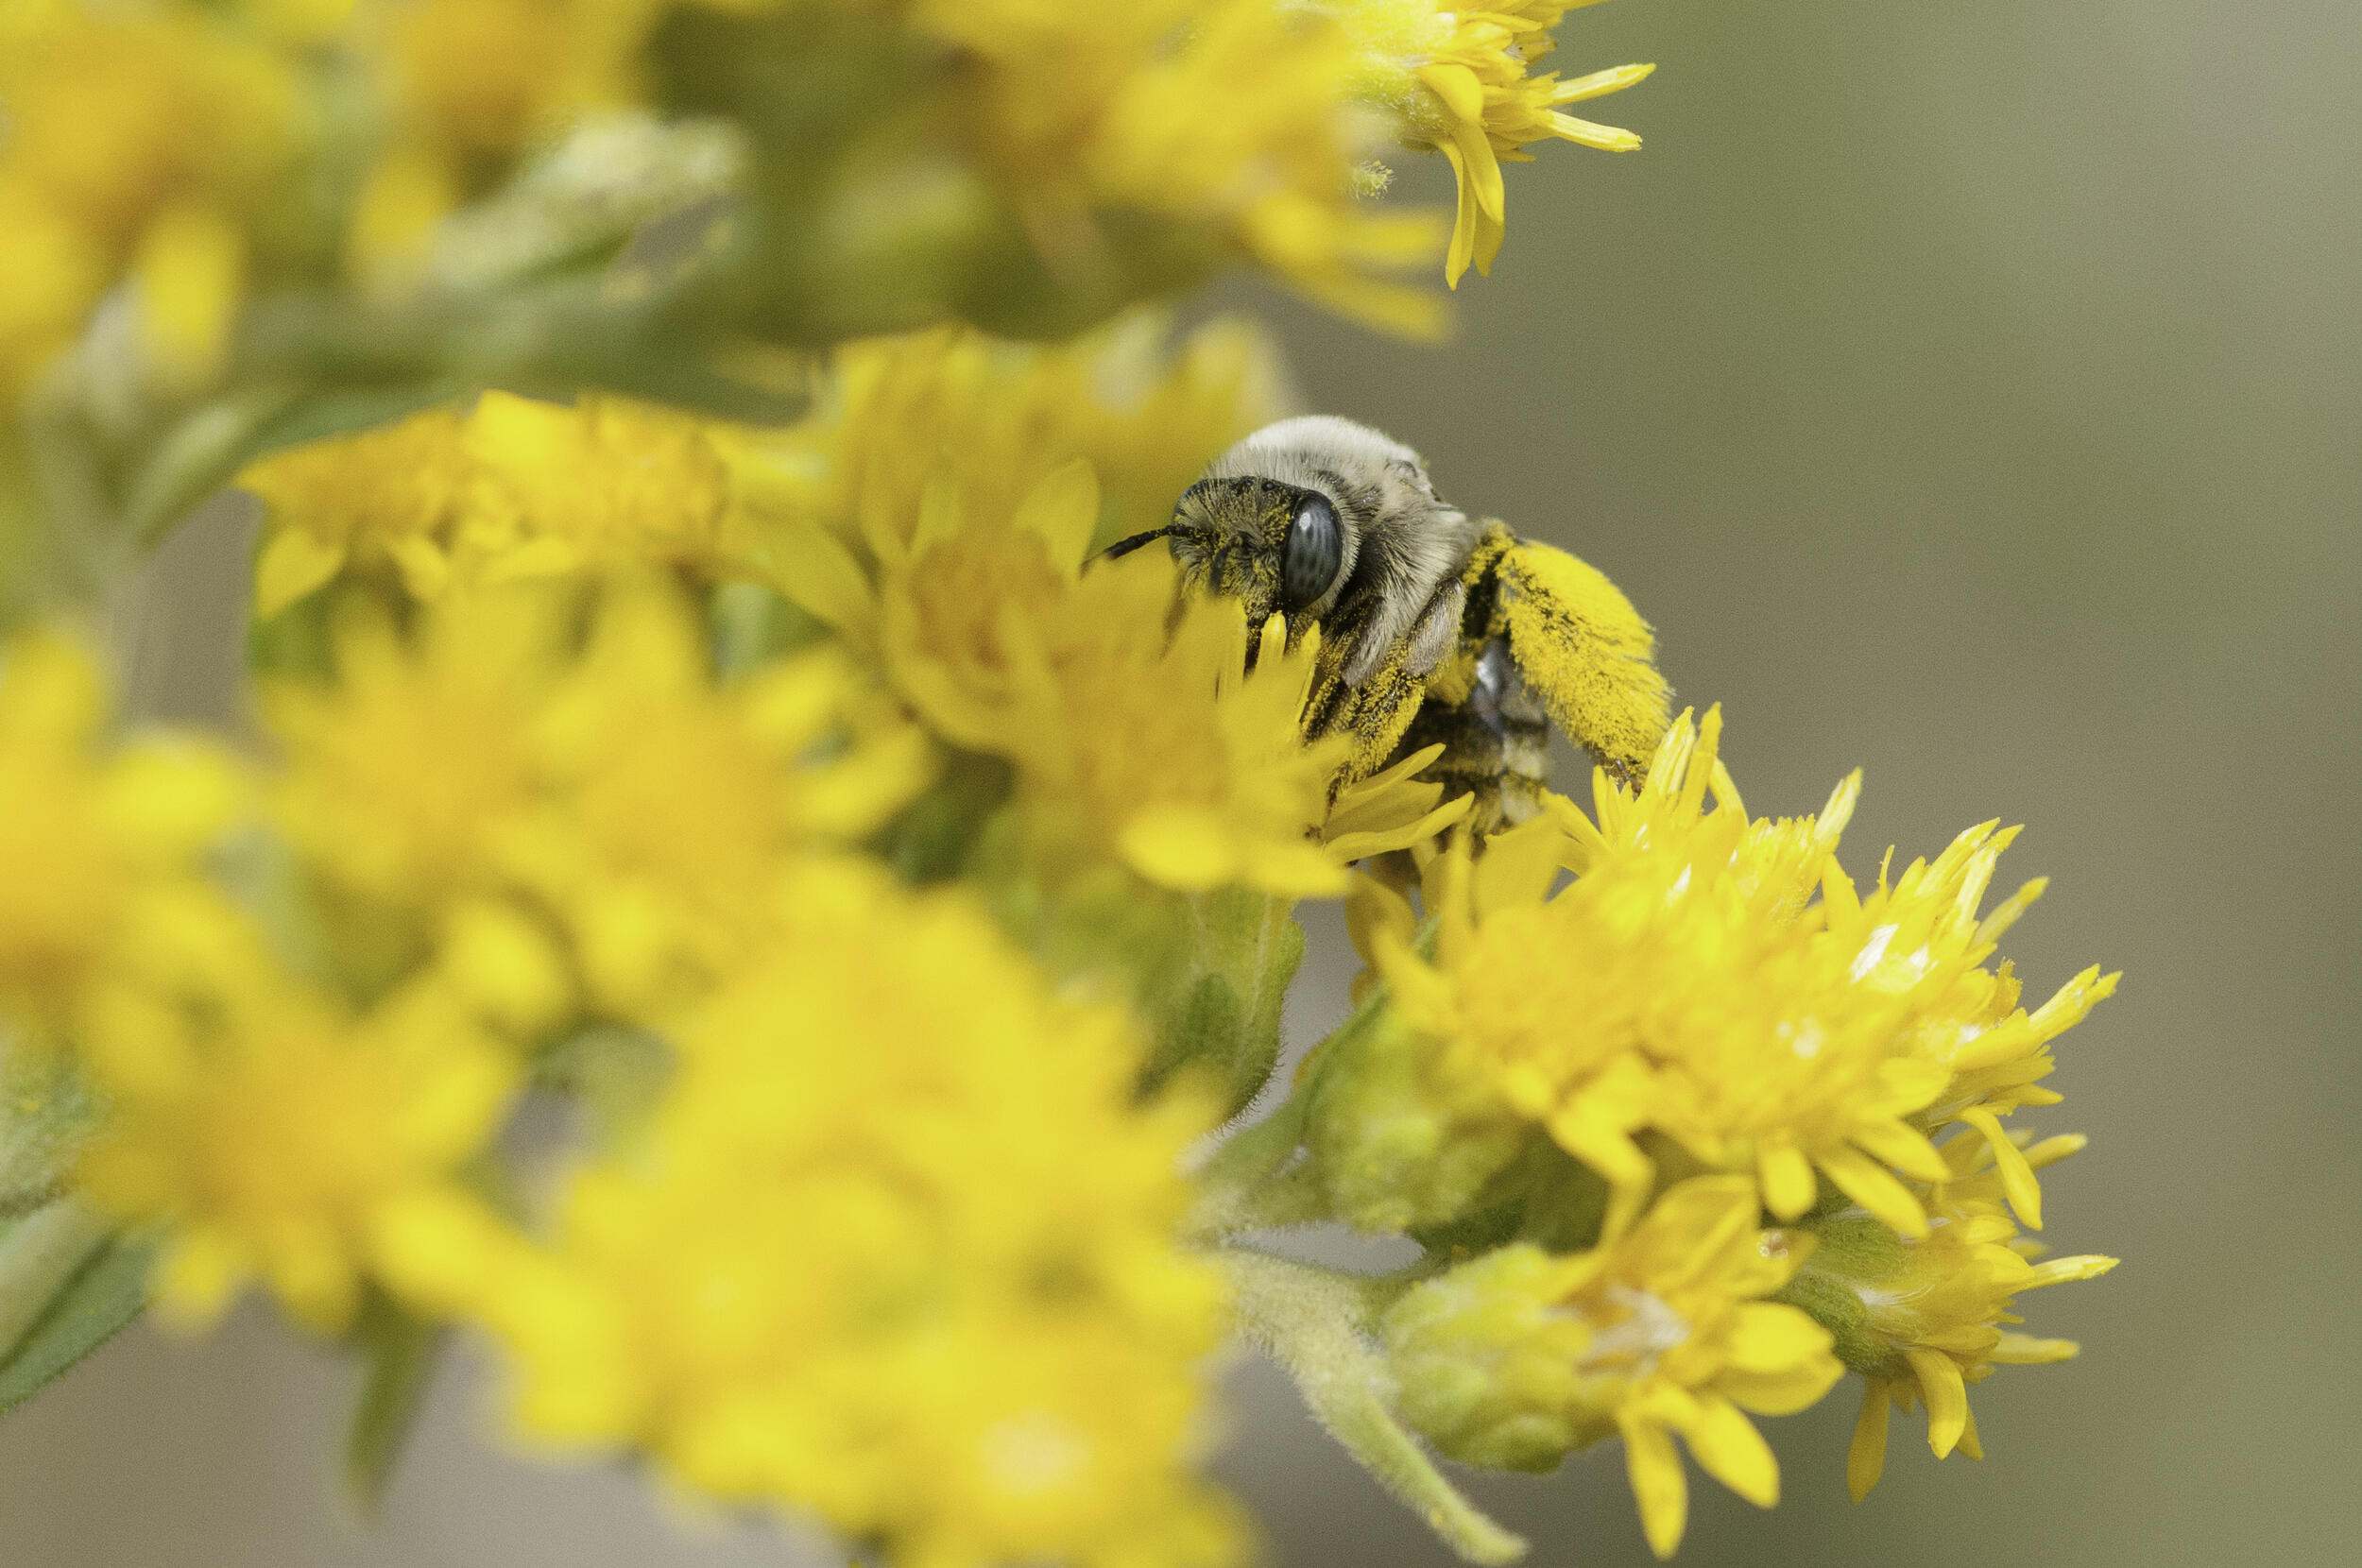 A bee on goldenrod flowers.